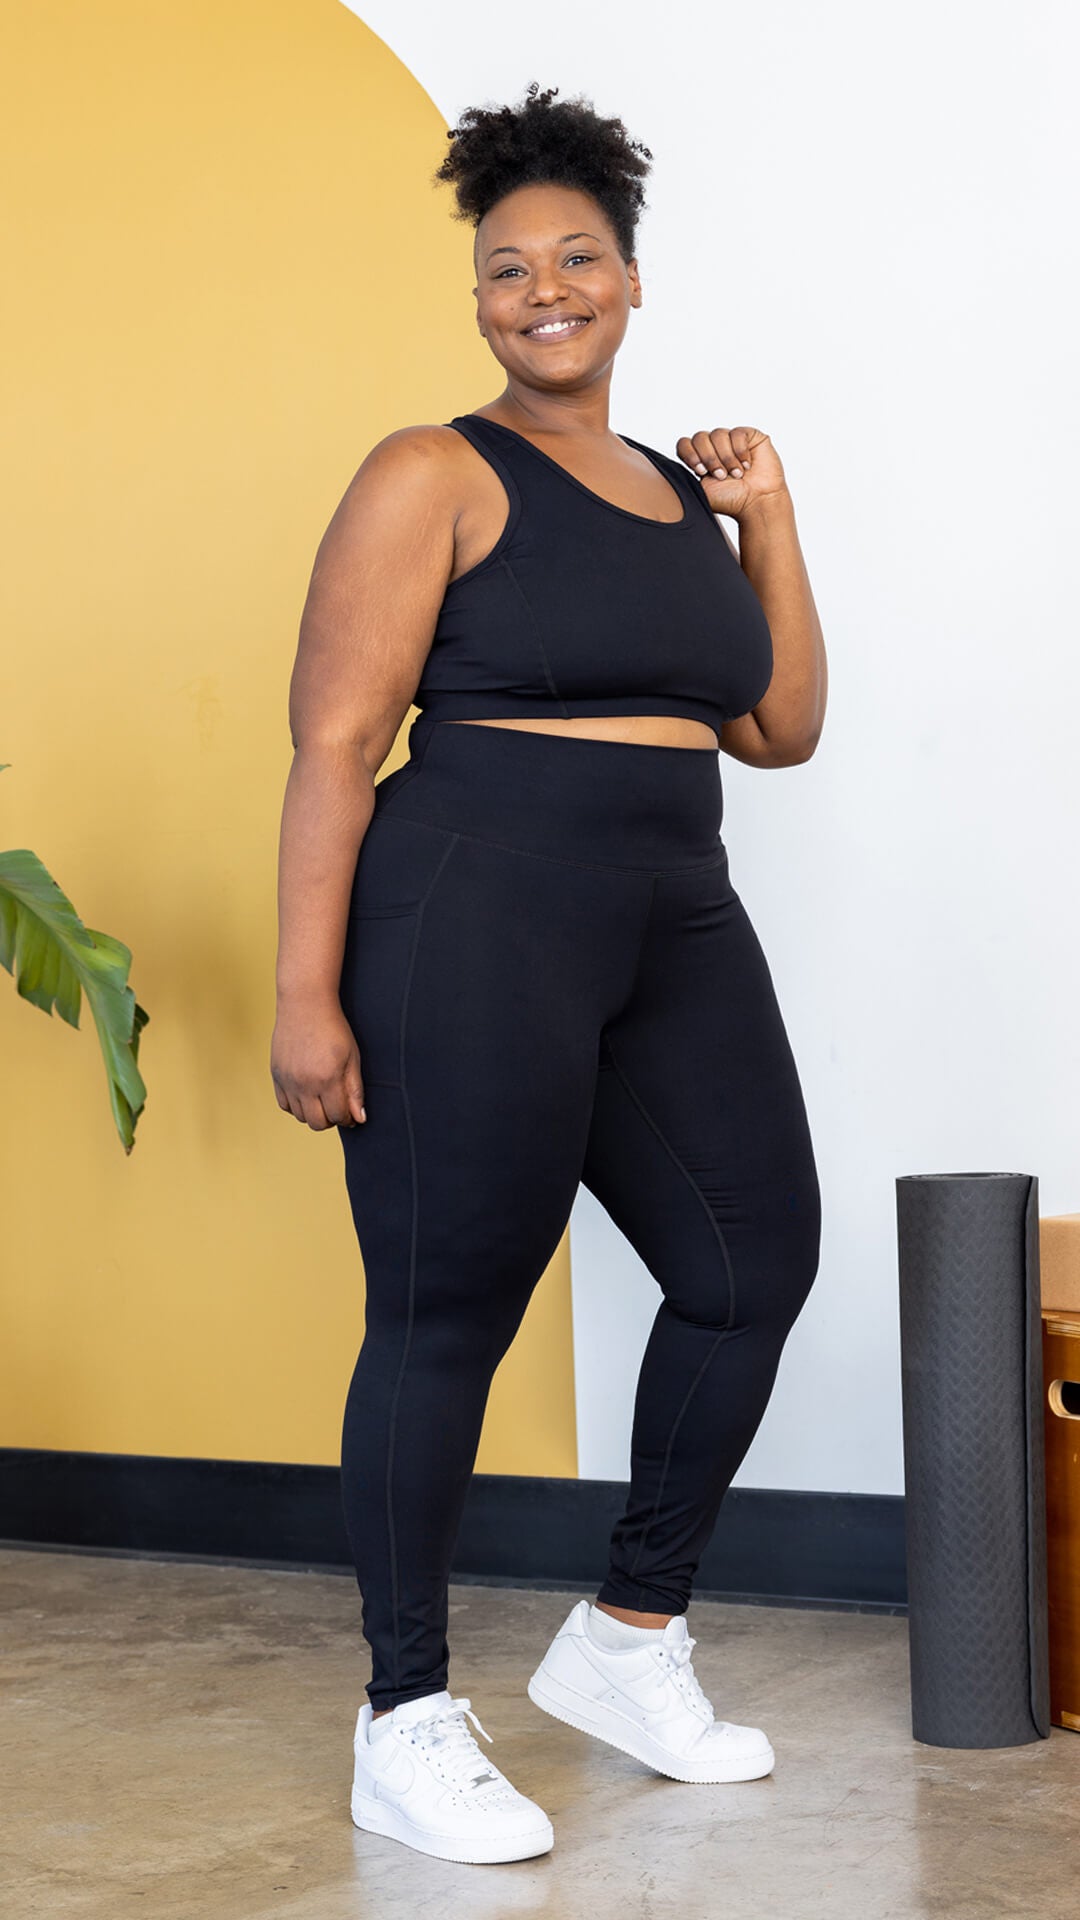 Plus size sports bra review by Superfit Hero